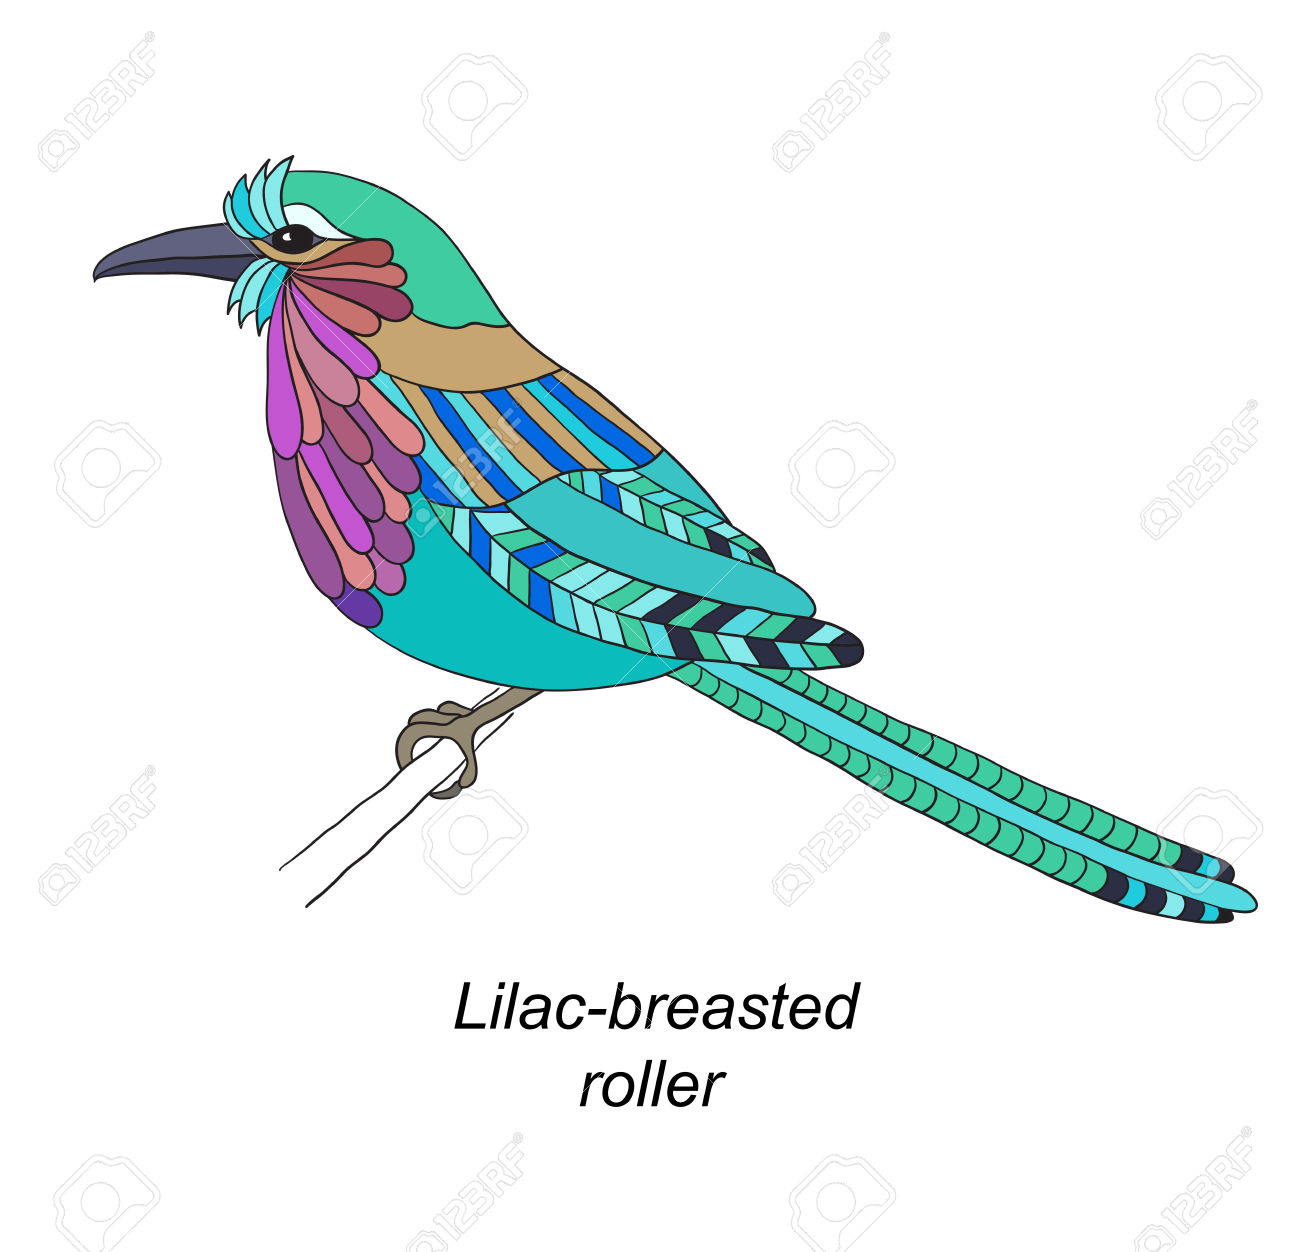 Lilac-breasted Roller clipart #13, Download drawings